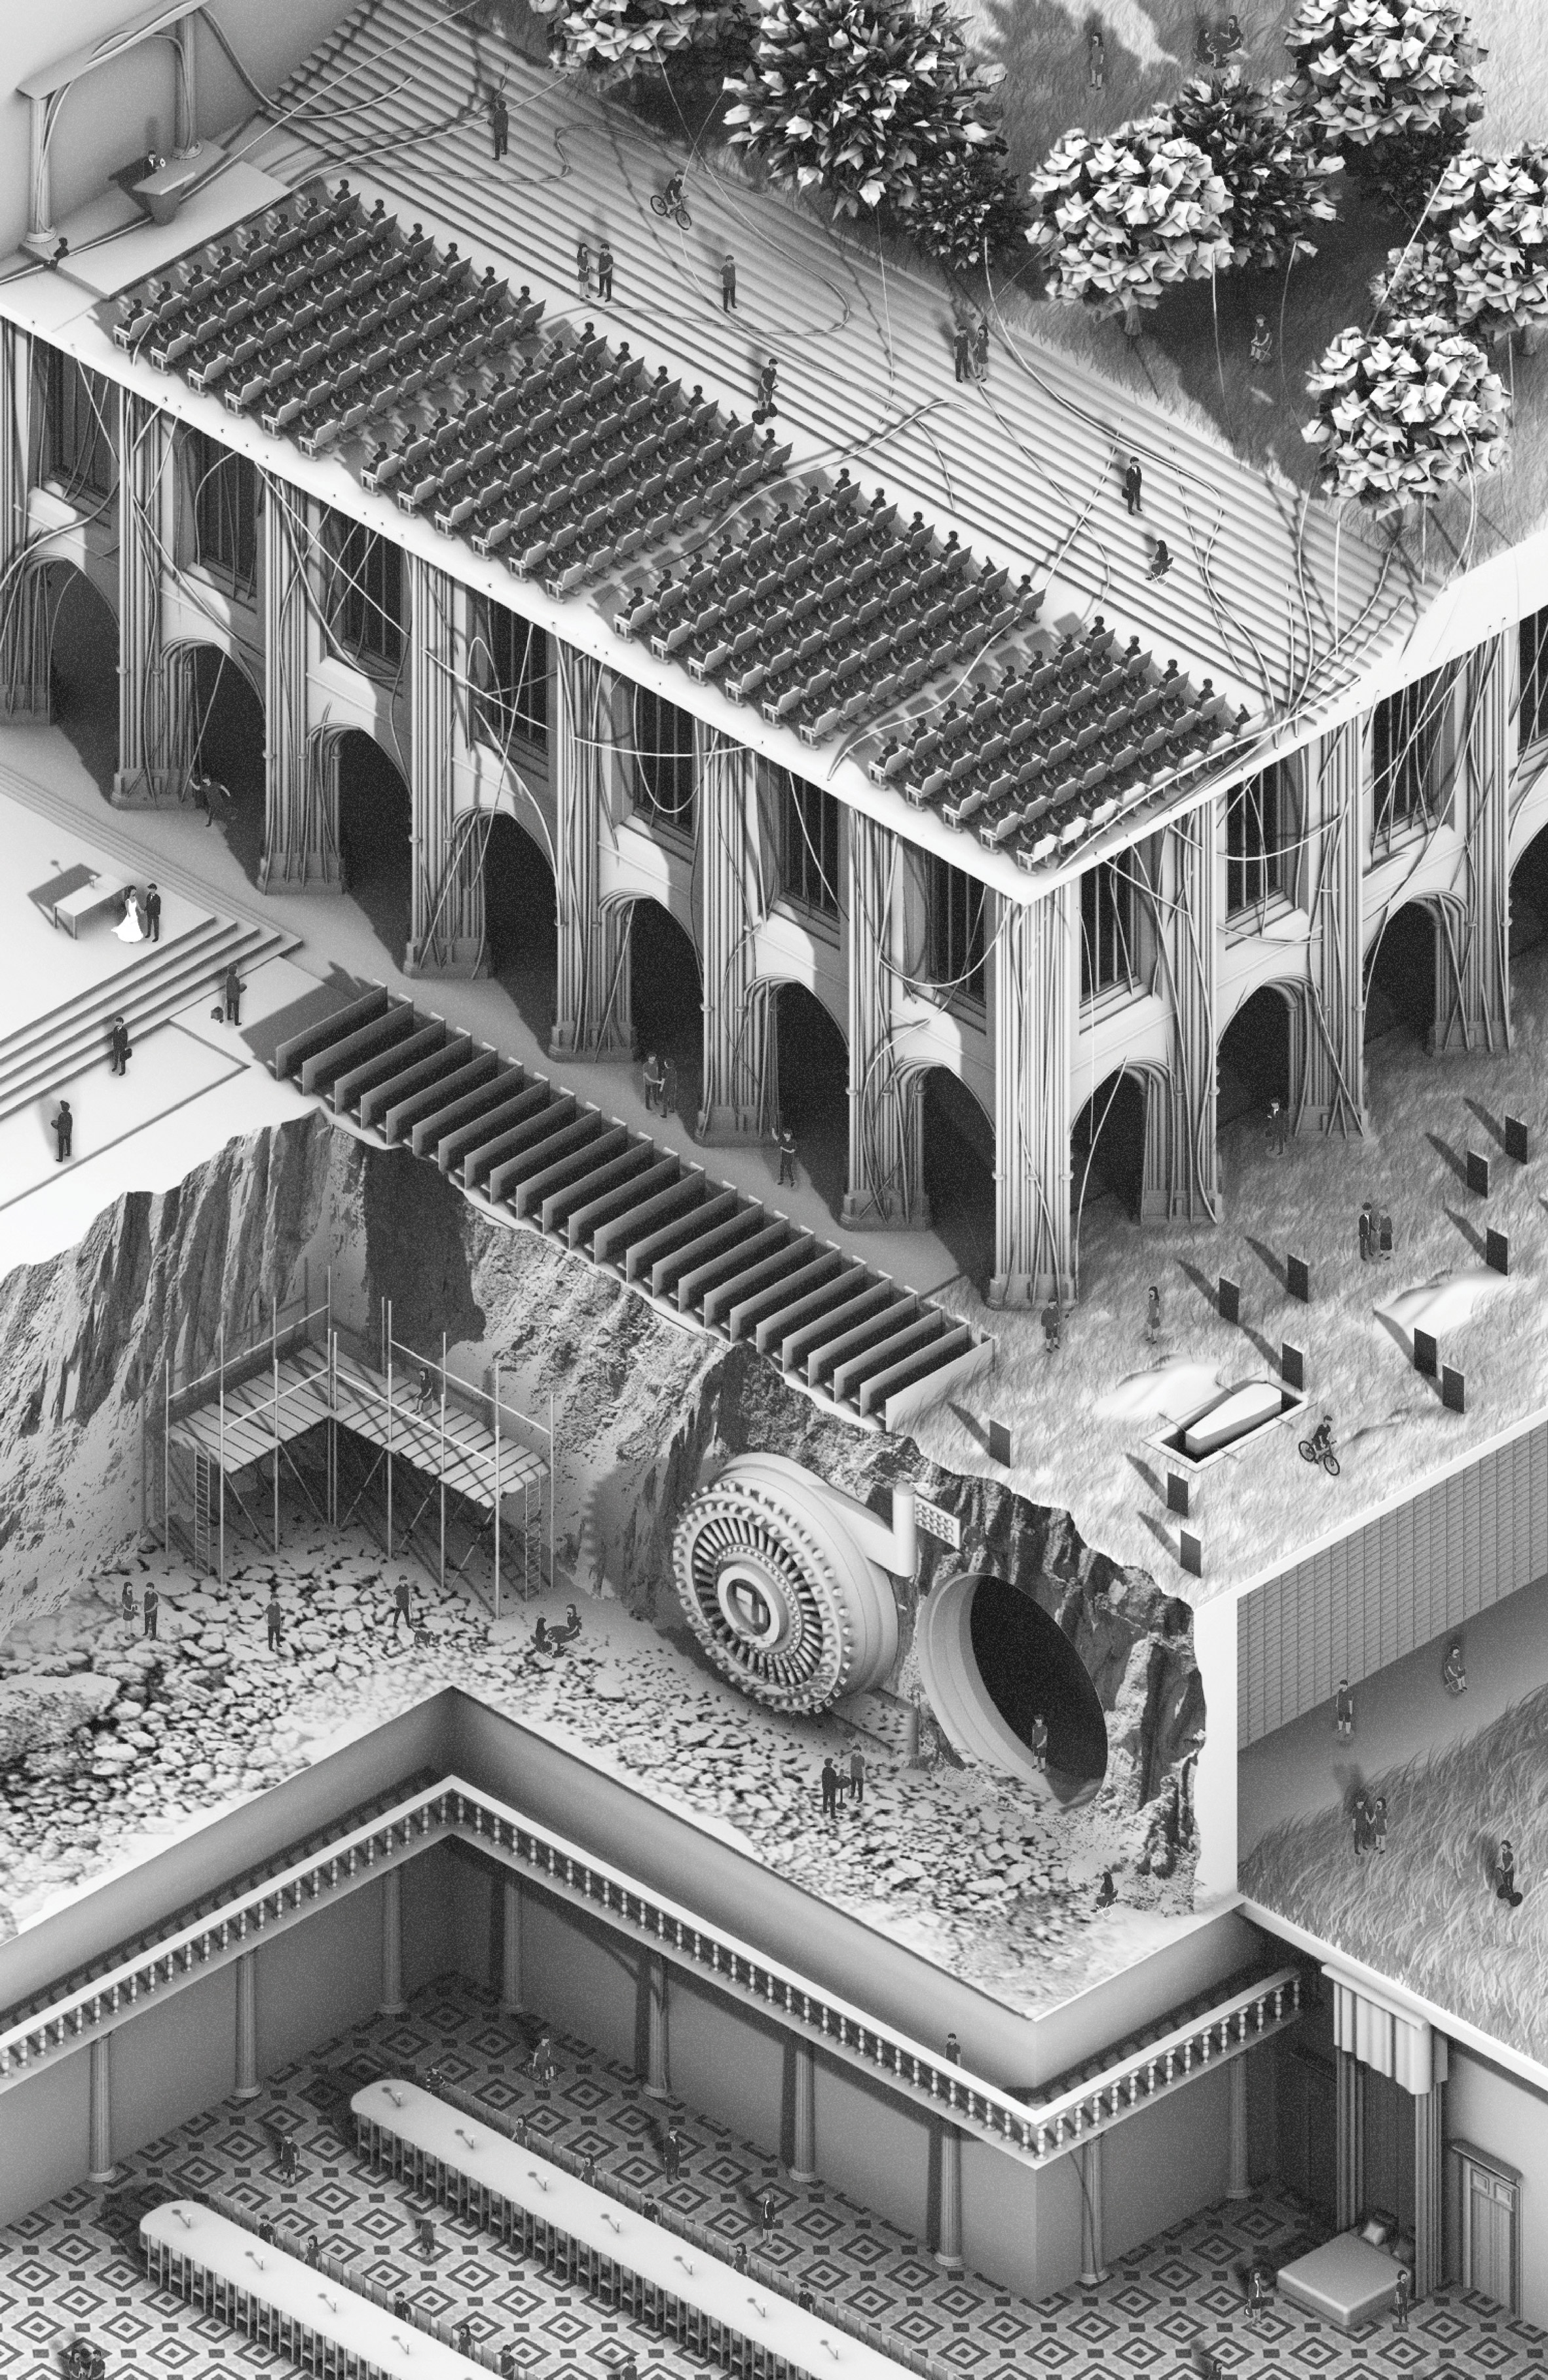 RIBA President's Medal student winners 2018: Justin Bean won the Bronze Medal with his project Dreaming of Electric Sheep